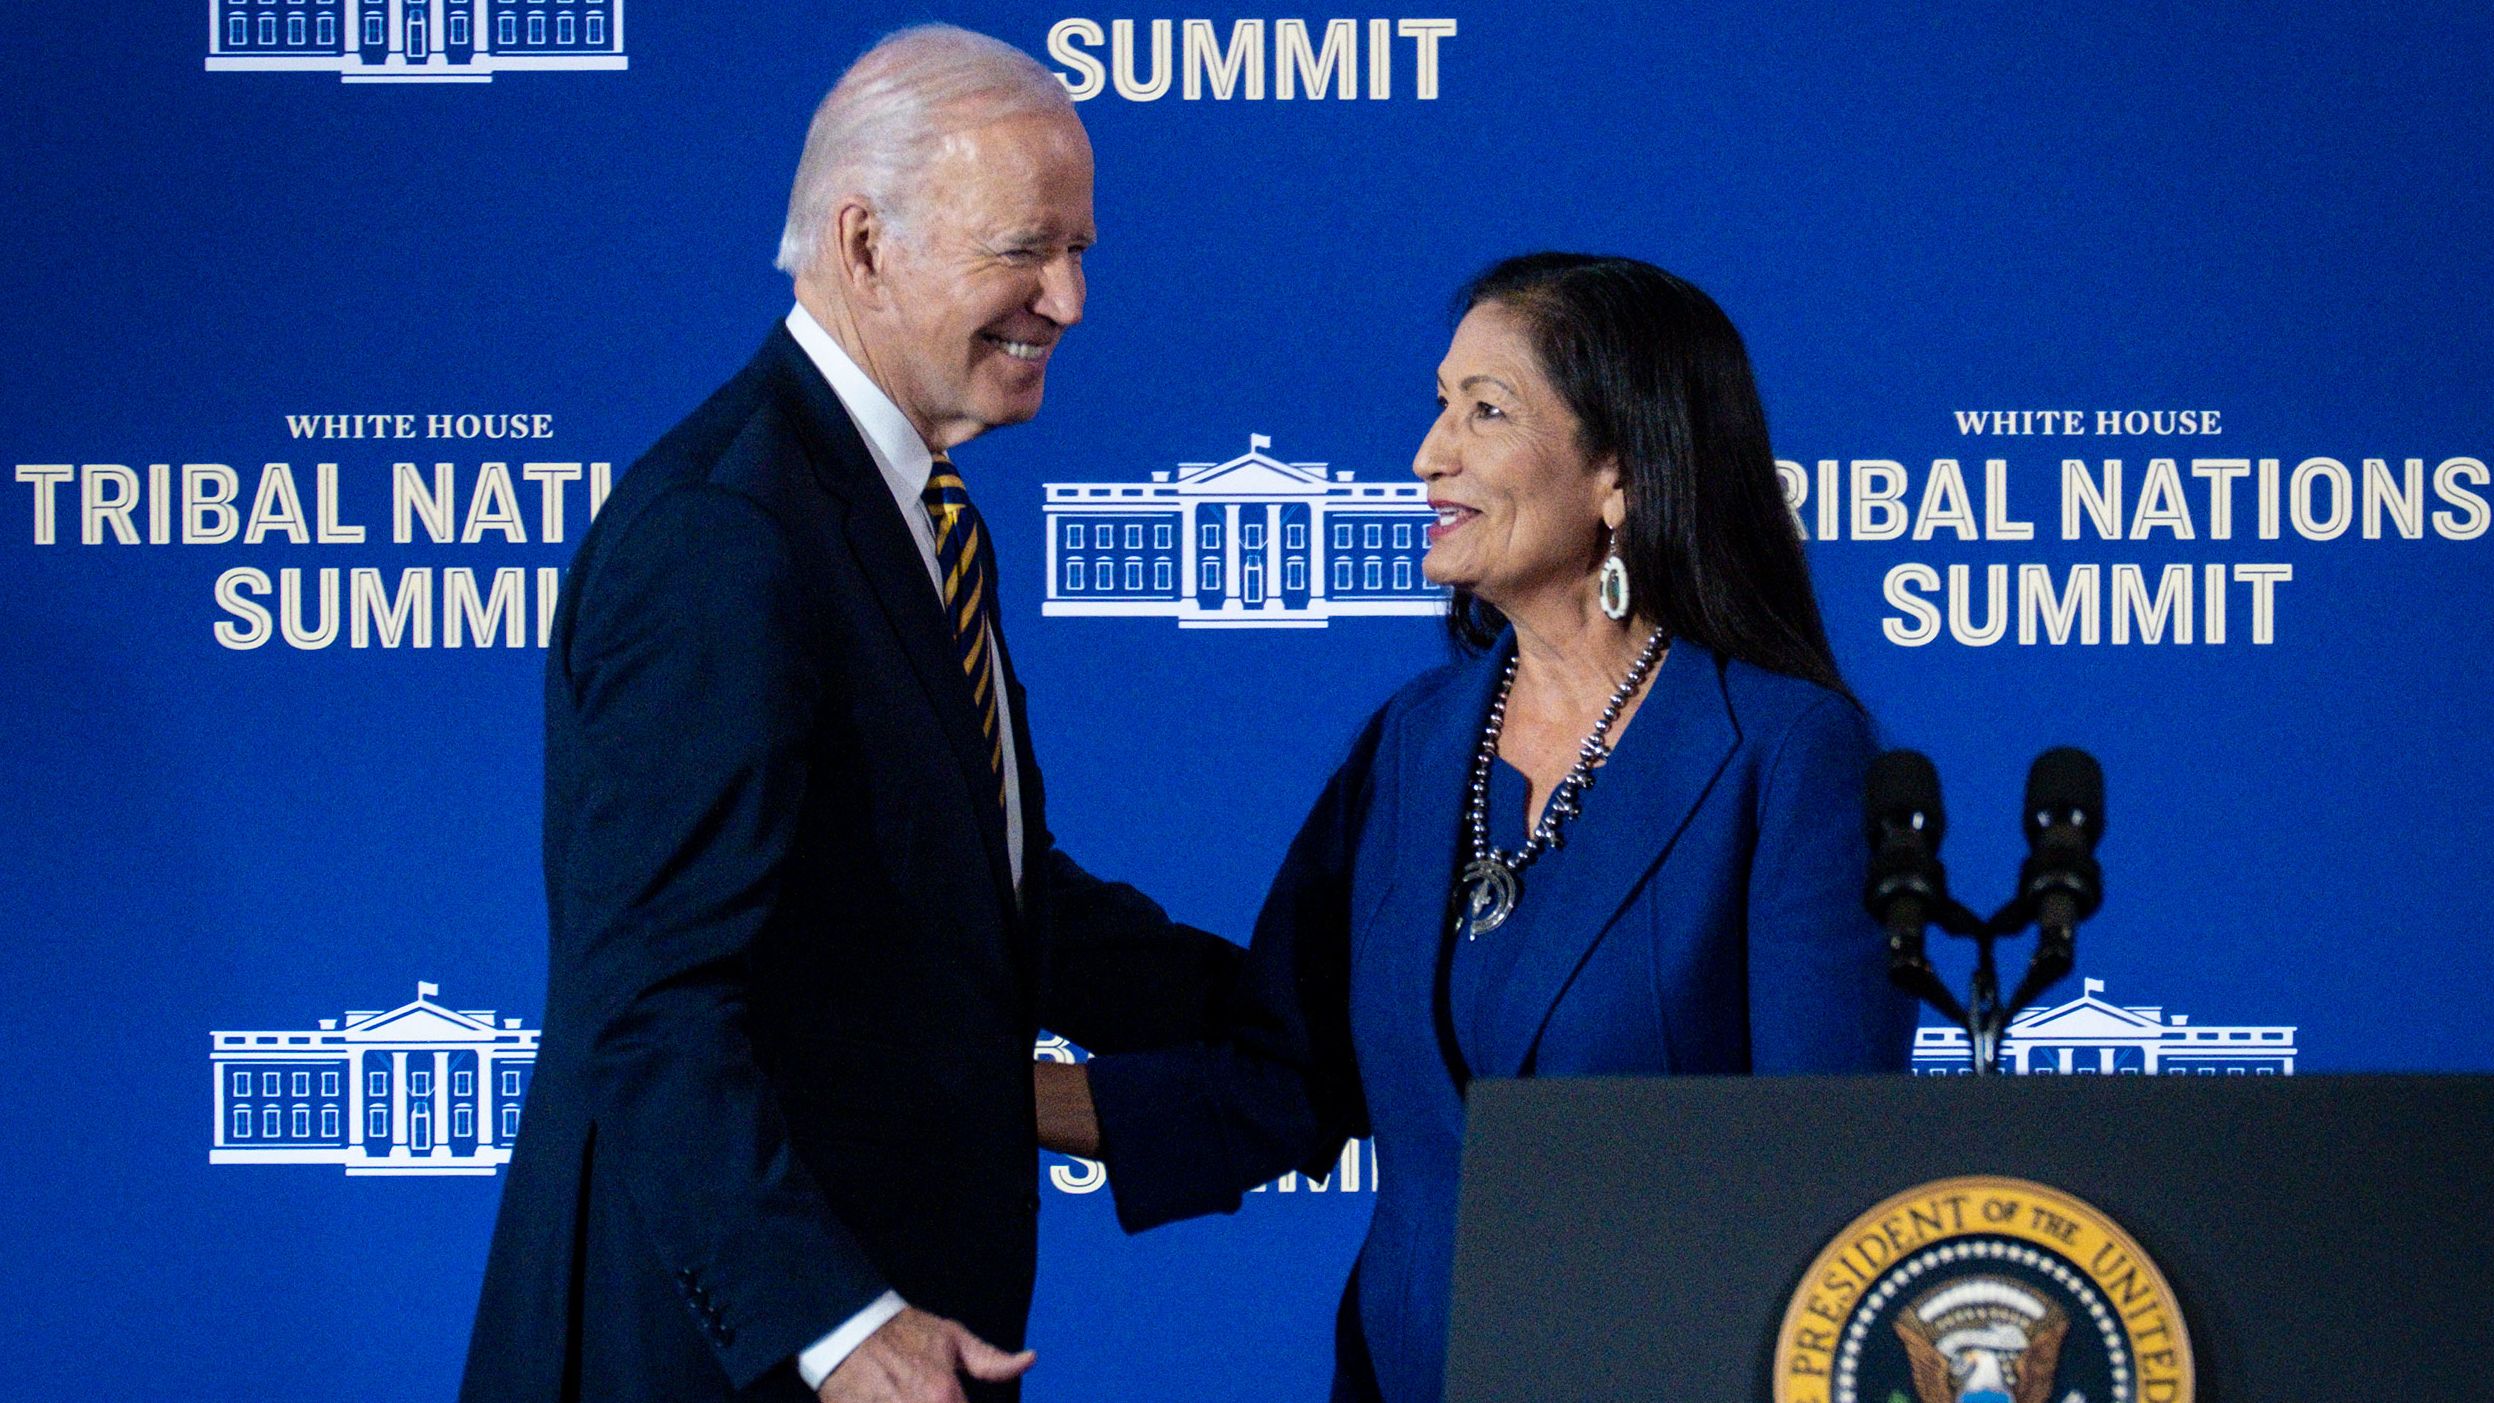 President Joe Biden greets Department of the Interior Secretary Deb Haaland during the 2022 White House Tribal Nations Summit at the Department of the Interior on November 30, 2022 in Washington, DC.